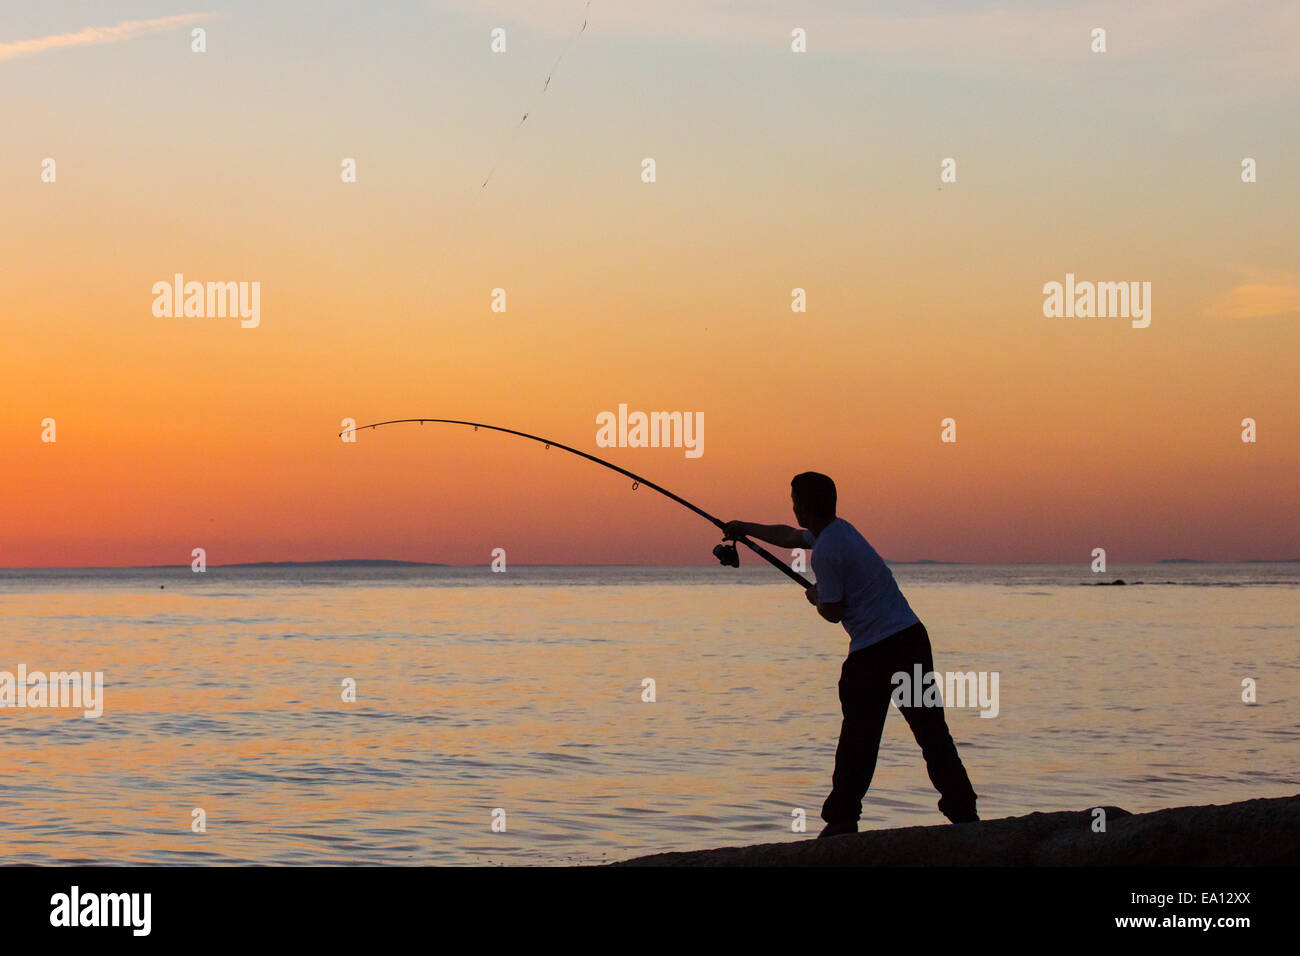 A lone angler on the shore sihouetted against an orange sunset Stock Photo